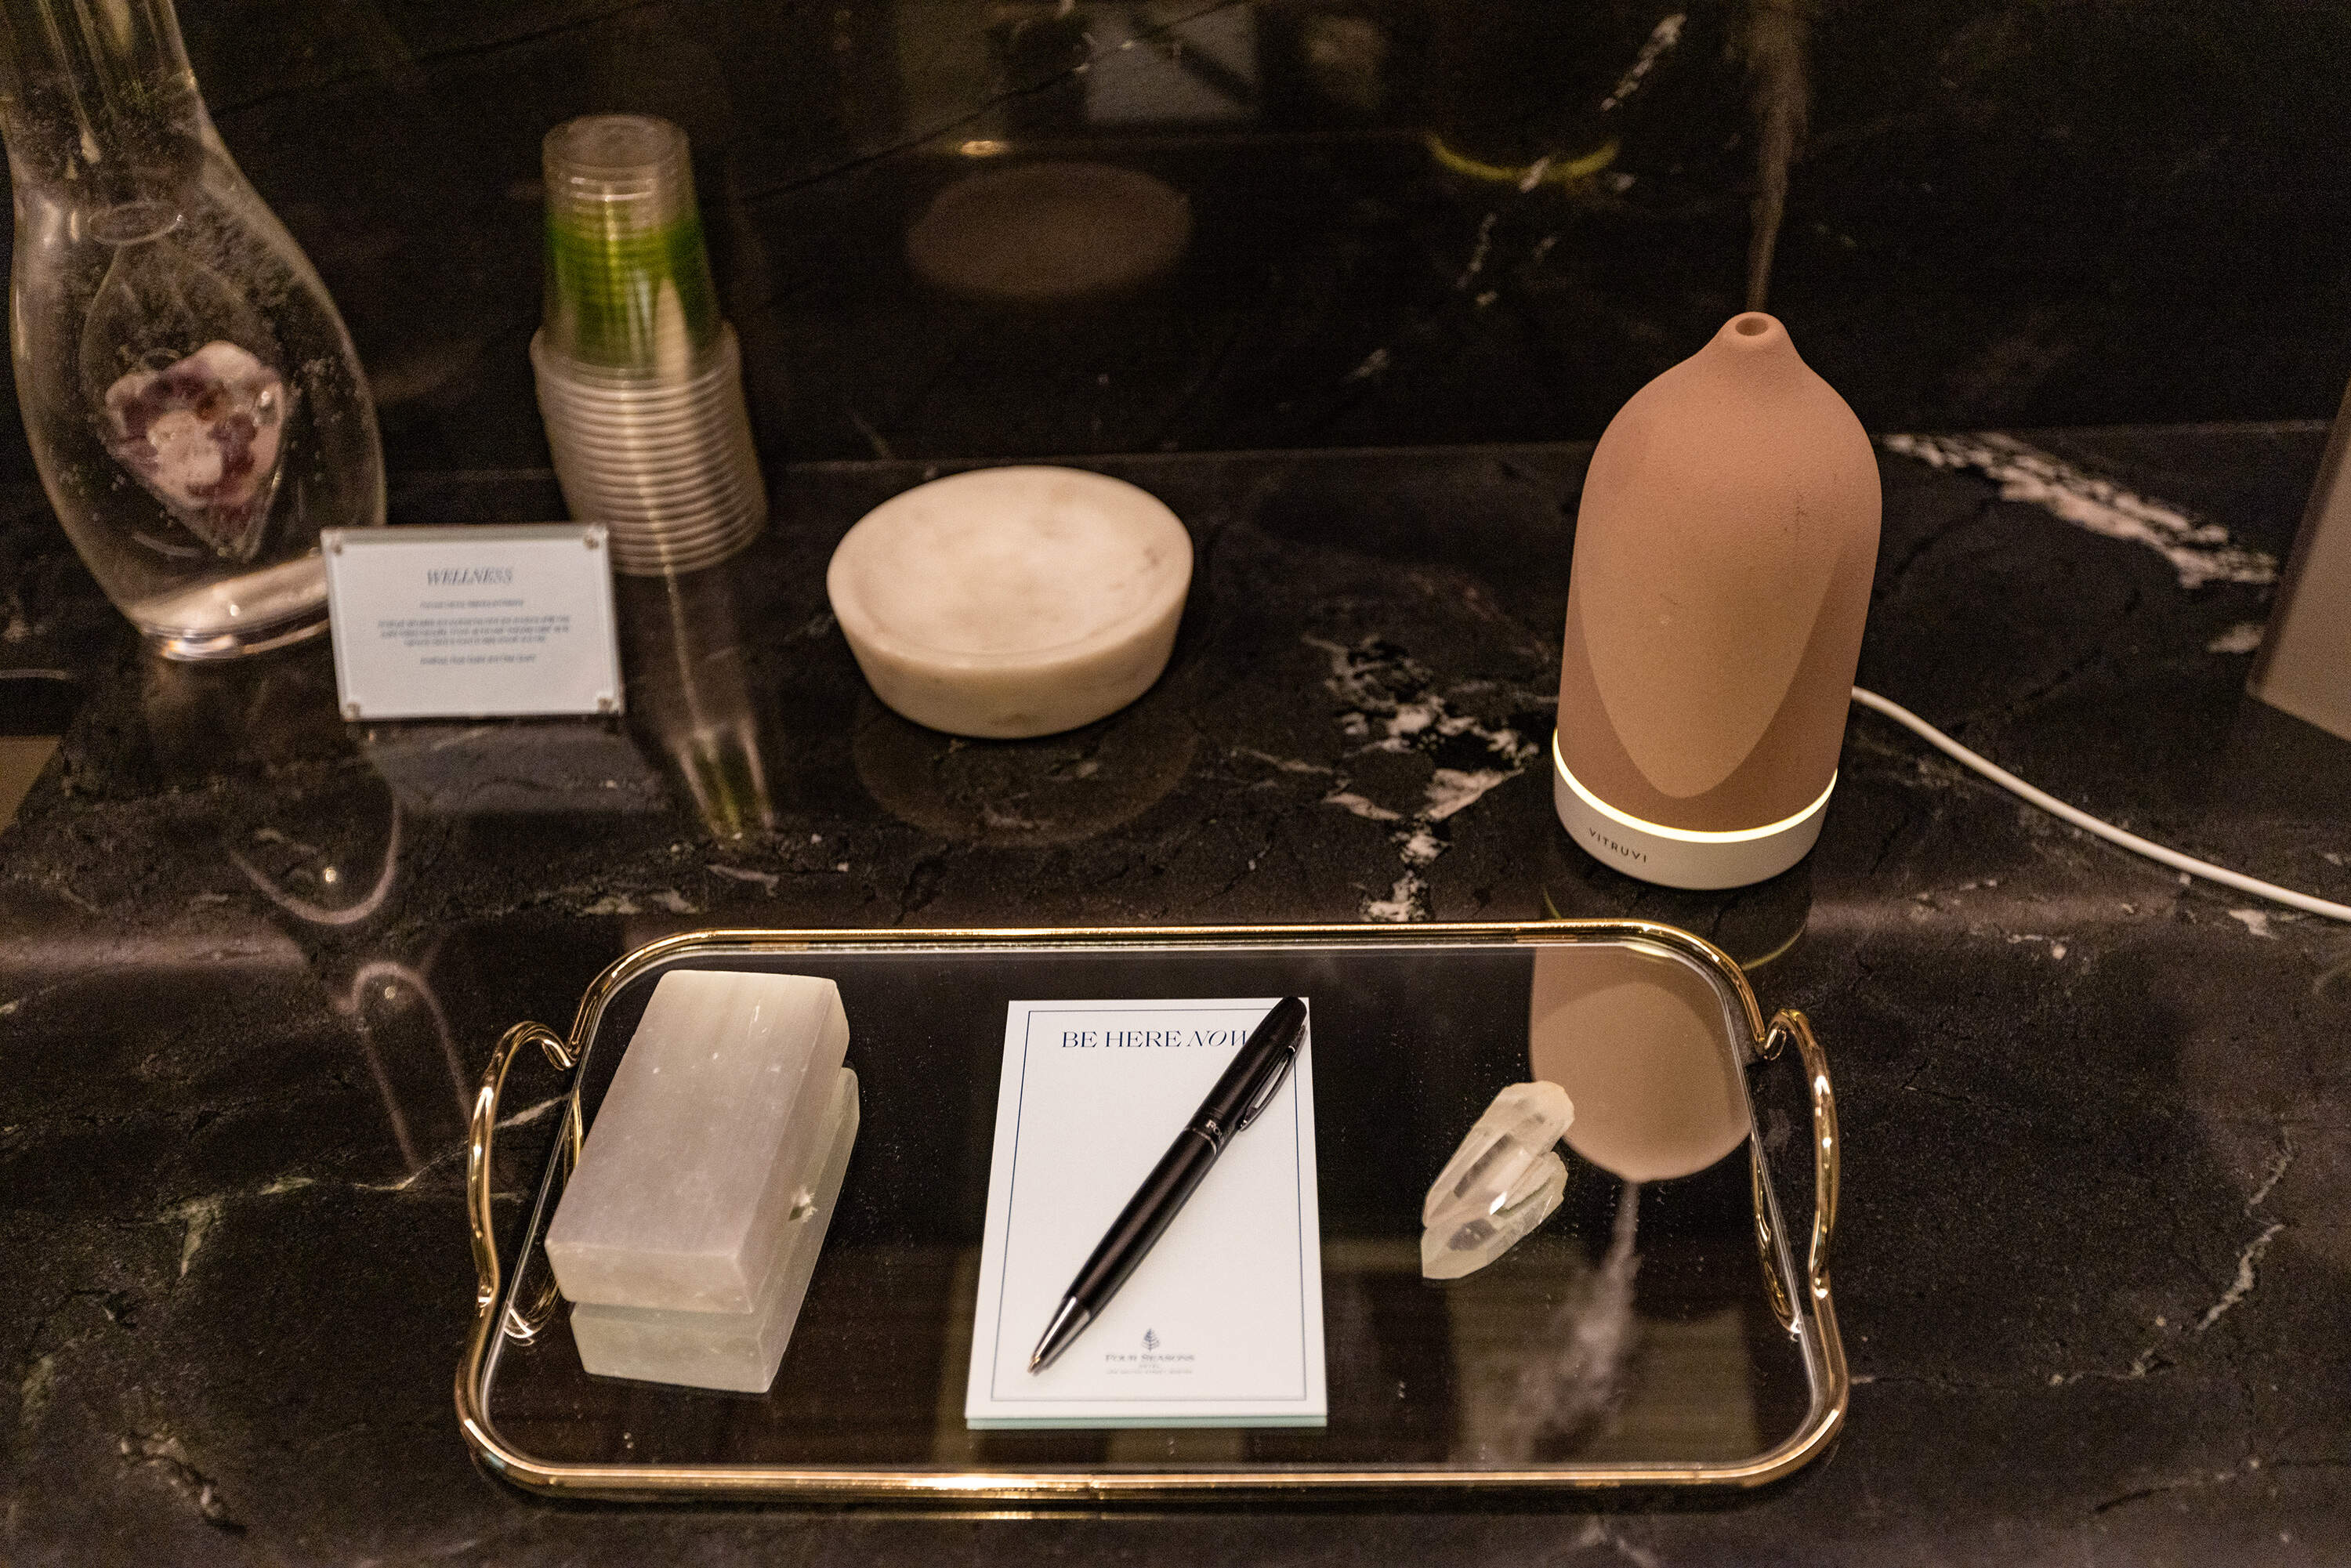 A platter containing crystals and a card is for writing down your intensions. as well as an aromatherapy diffuser are used in the treatment room at the Spa at One Dalton. (Jesse Costa/WBUR)